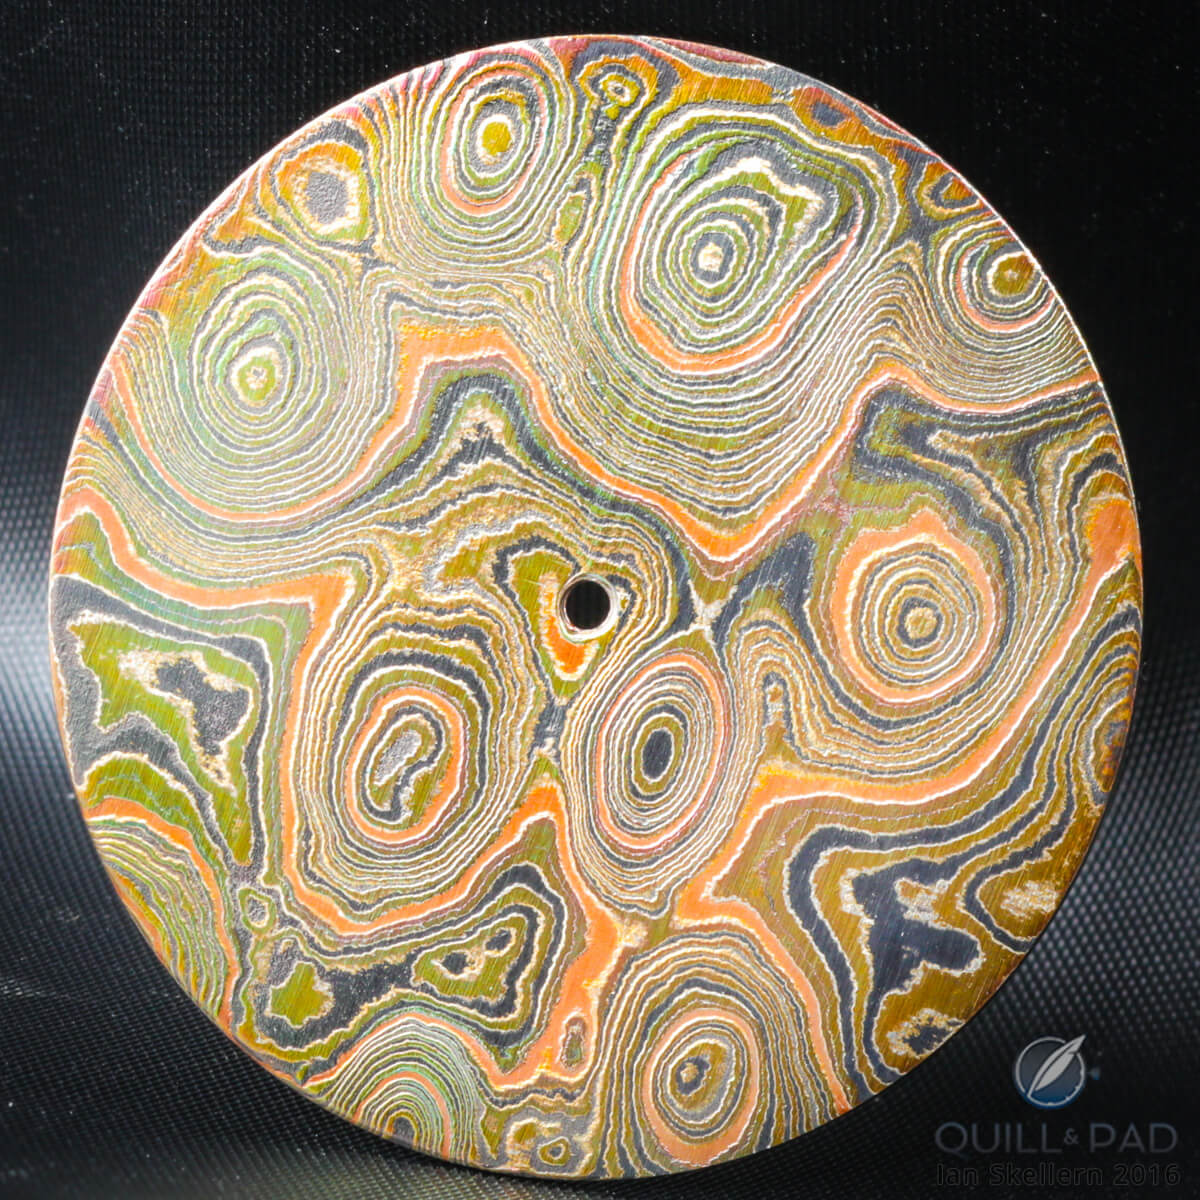 An example of a beautiful Damascus steel Sarek dial hand-forged and tempered by GoS’s Johan Gustafsson